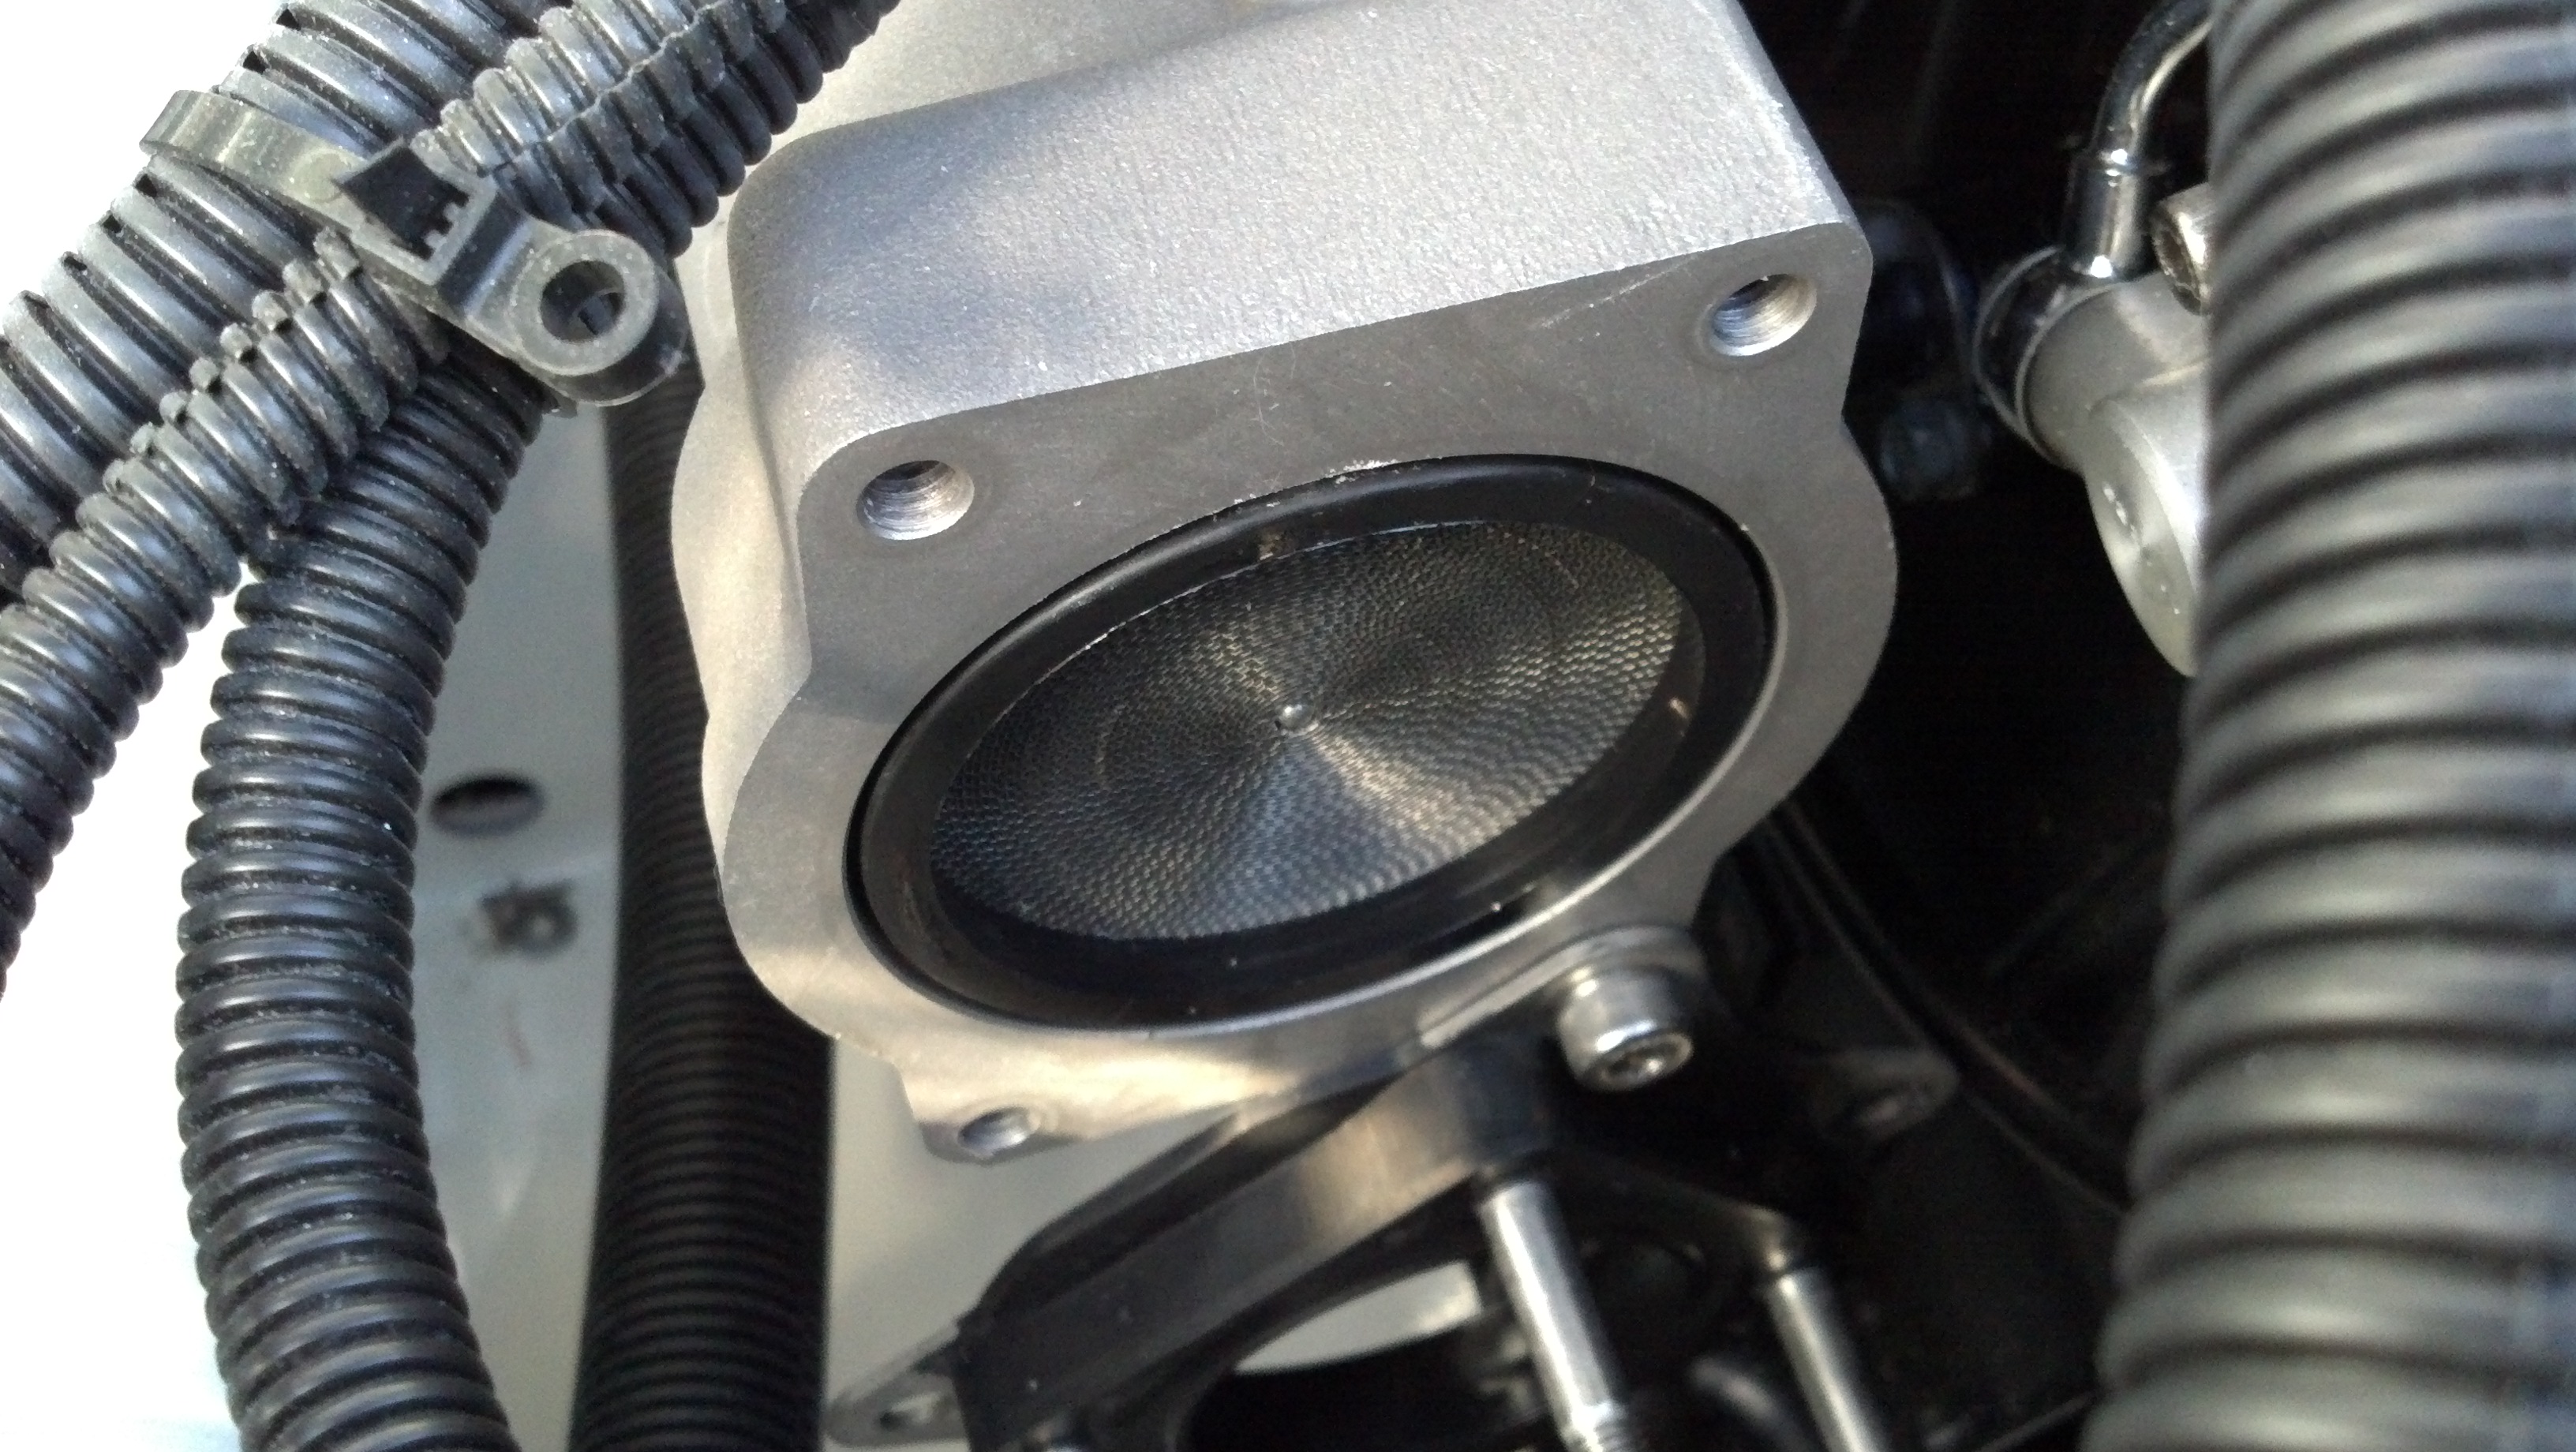 throttle body with spark arrester